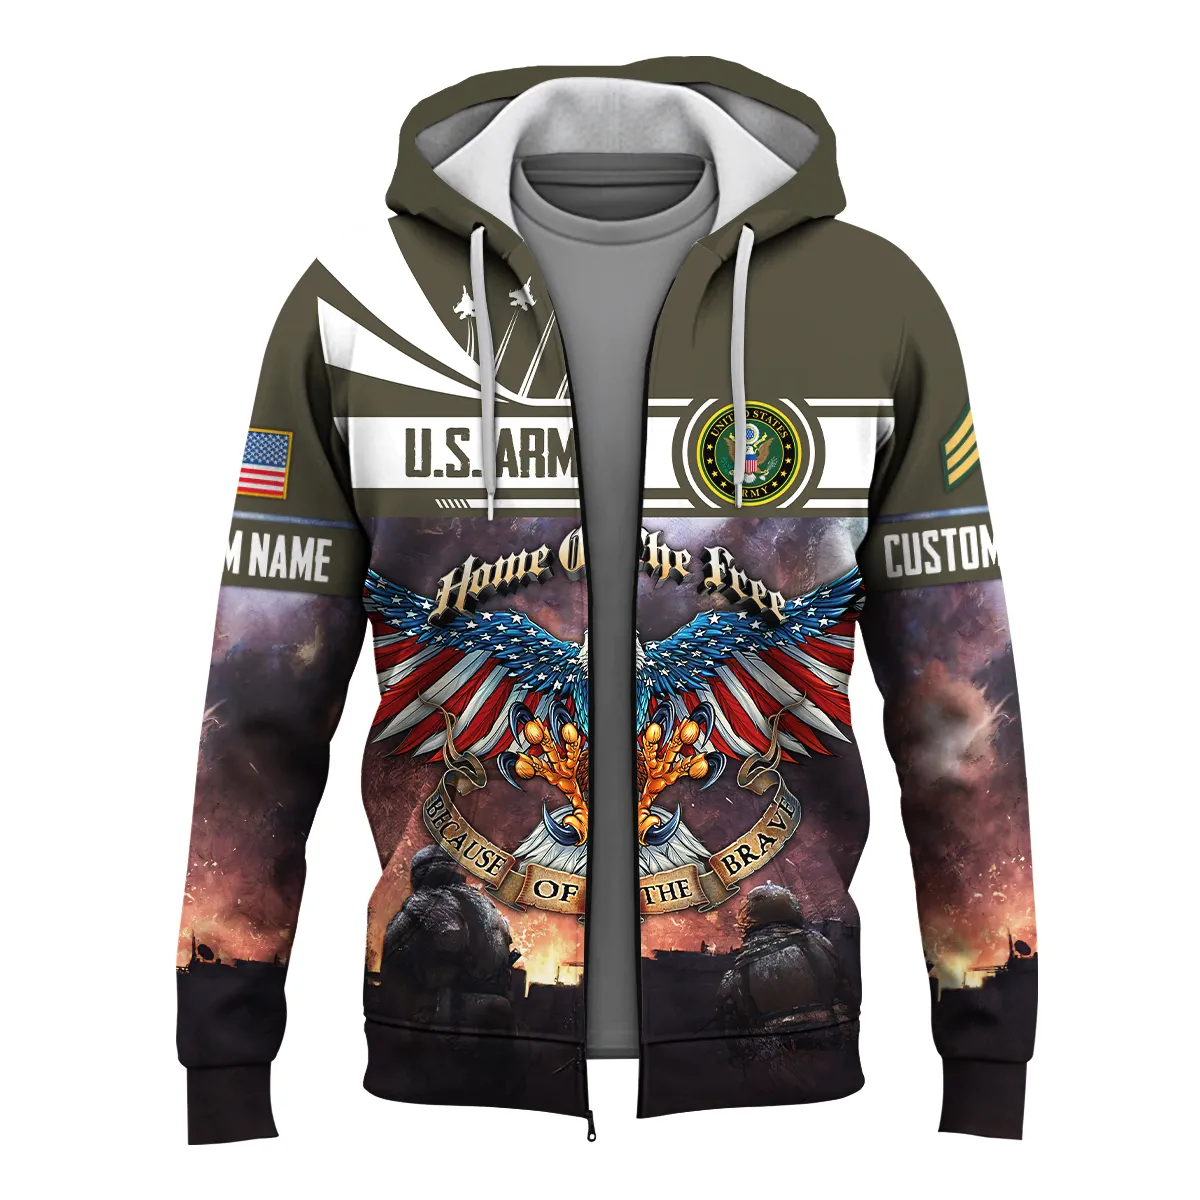 Personalized Home Of The Free Because Of The Brave U.S. Army Apparel All Over Prints BLVTR250624A01AM